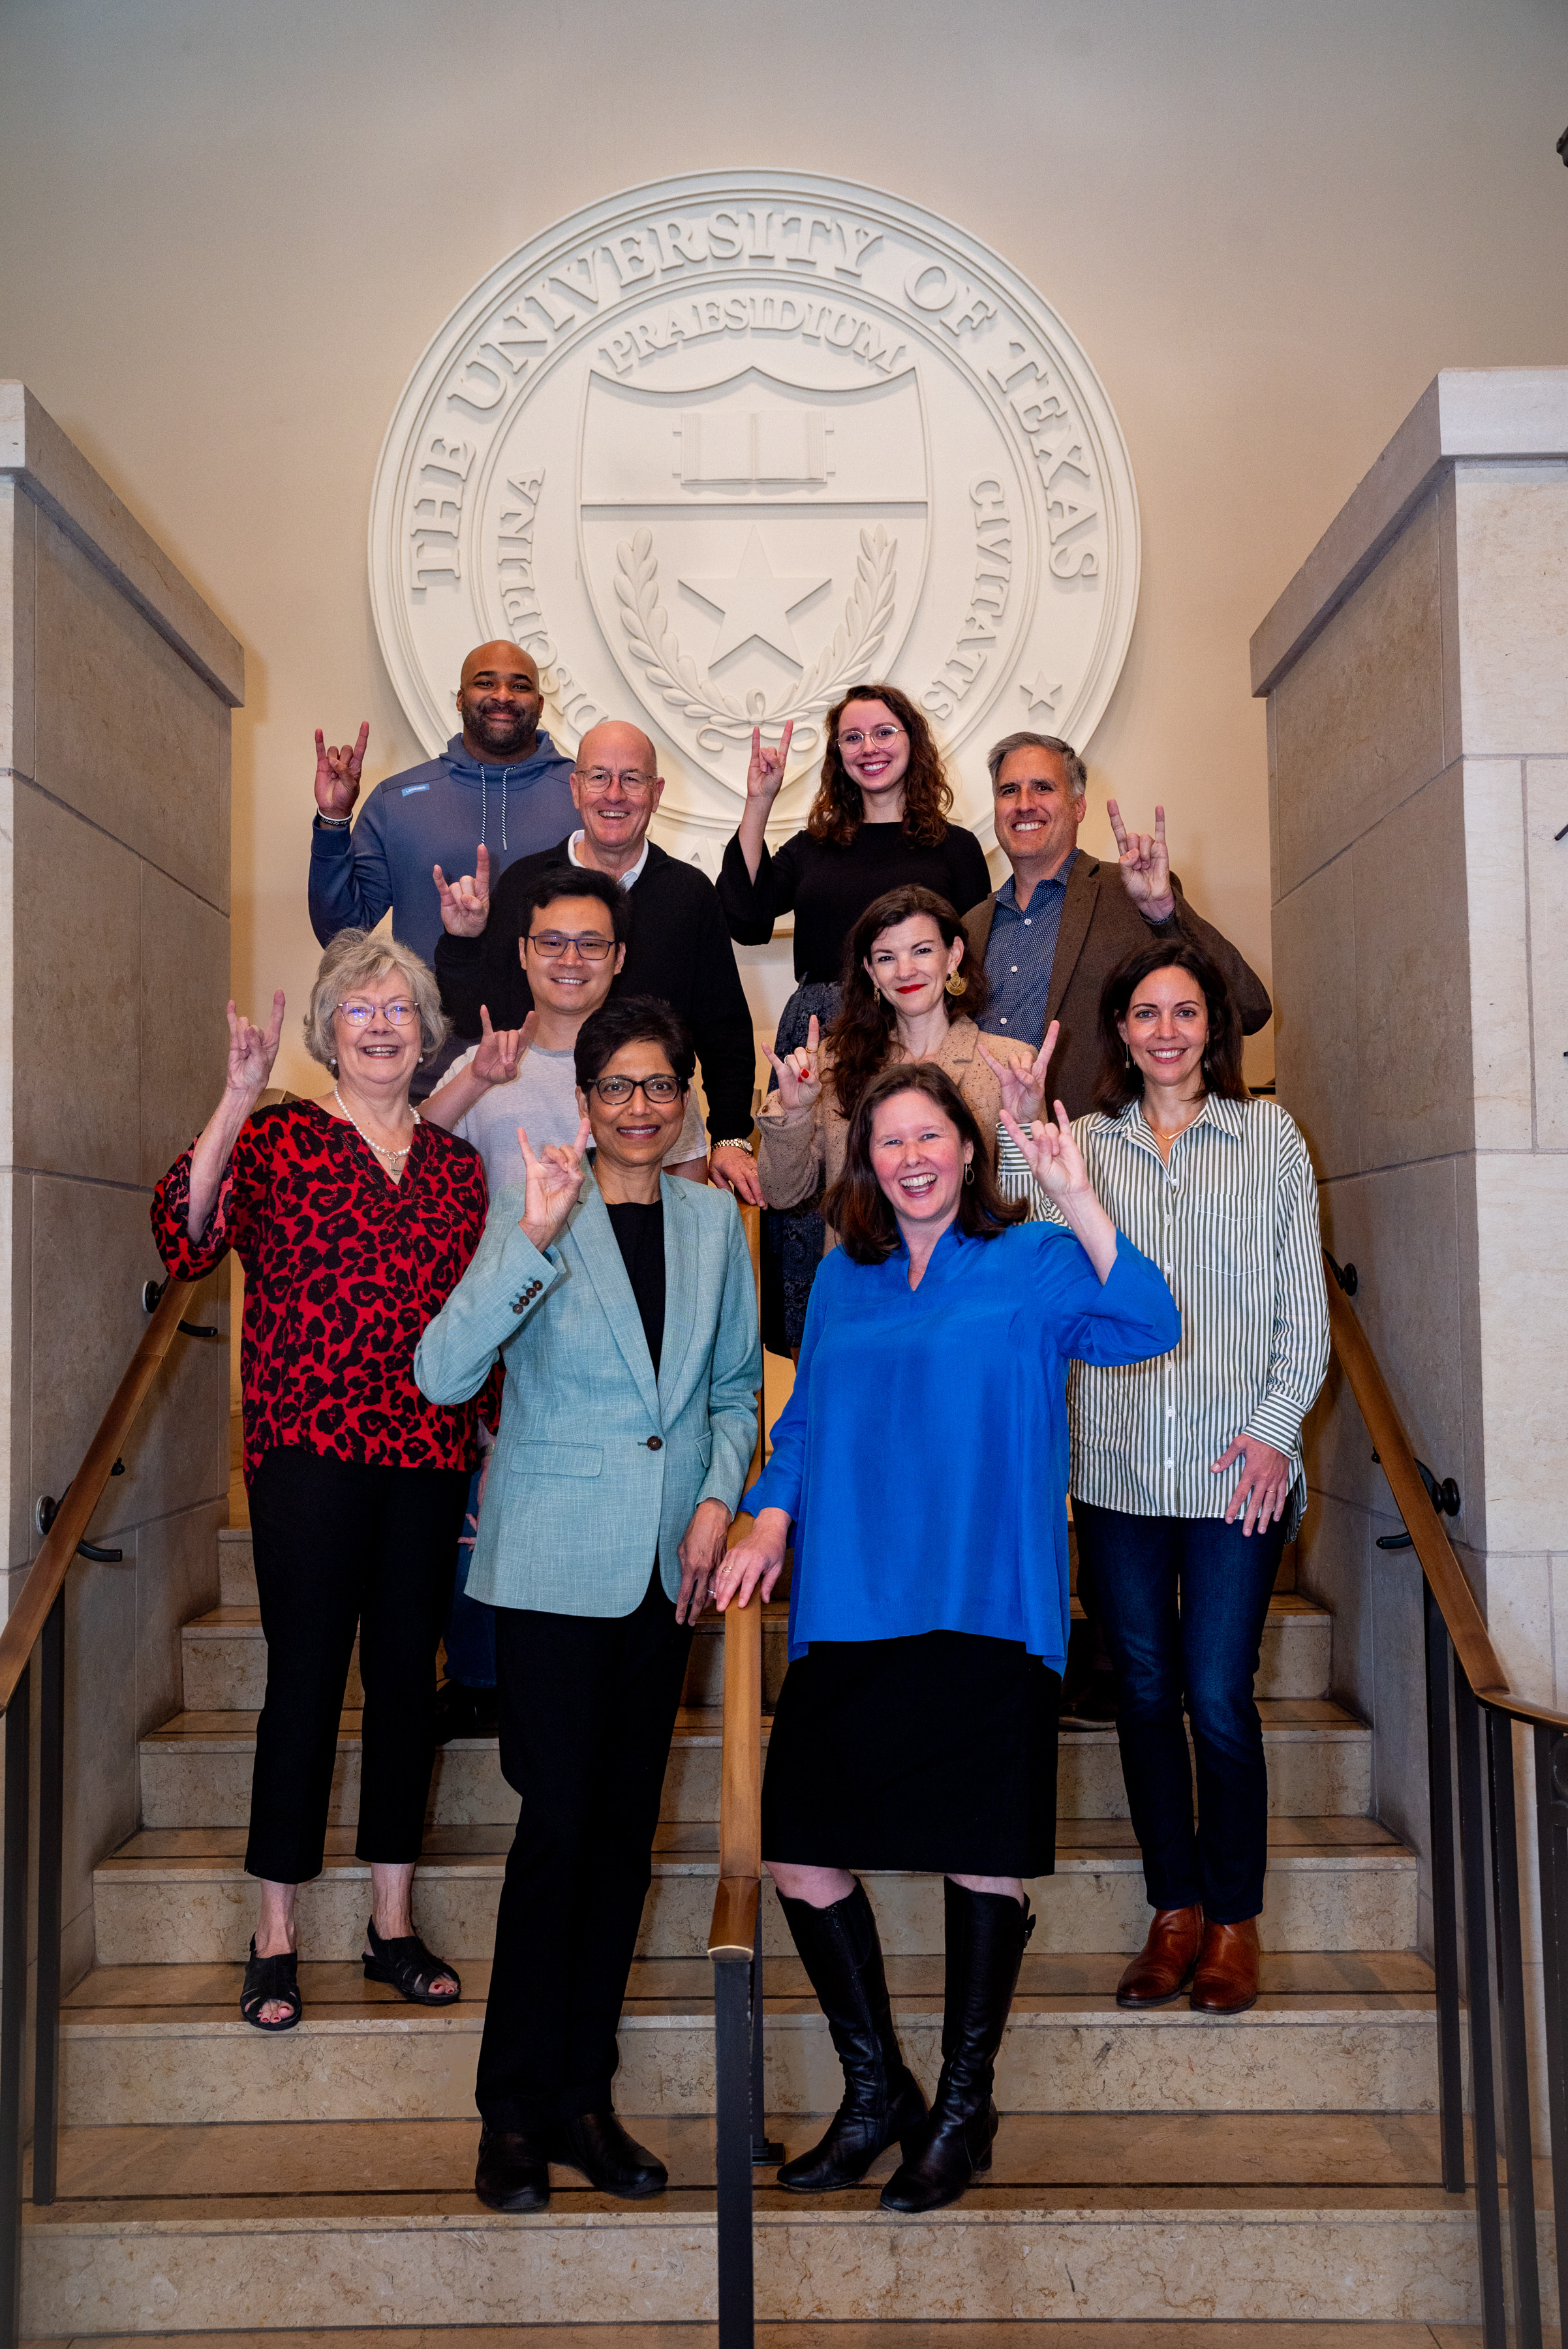 Group photo of RGK faculty in staff on the stairs. The group is standing in front of a large UT Austin seal and doing the "Hook 'Em" with their handsand 